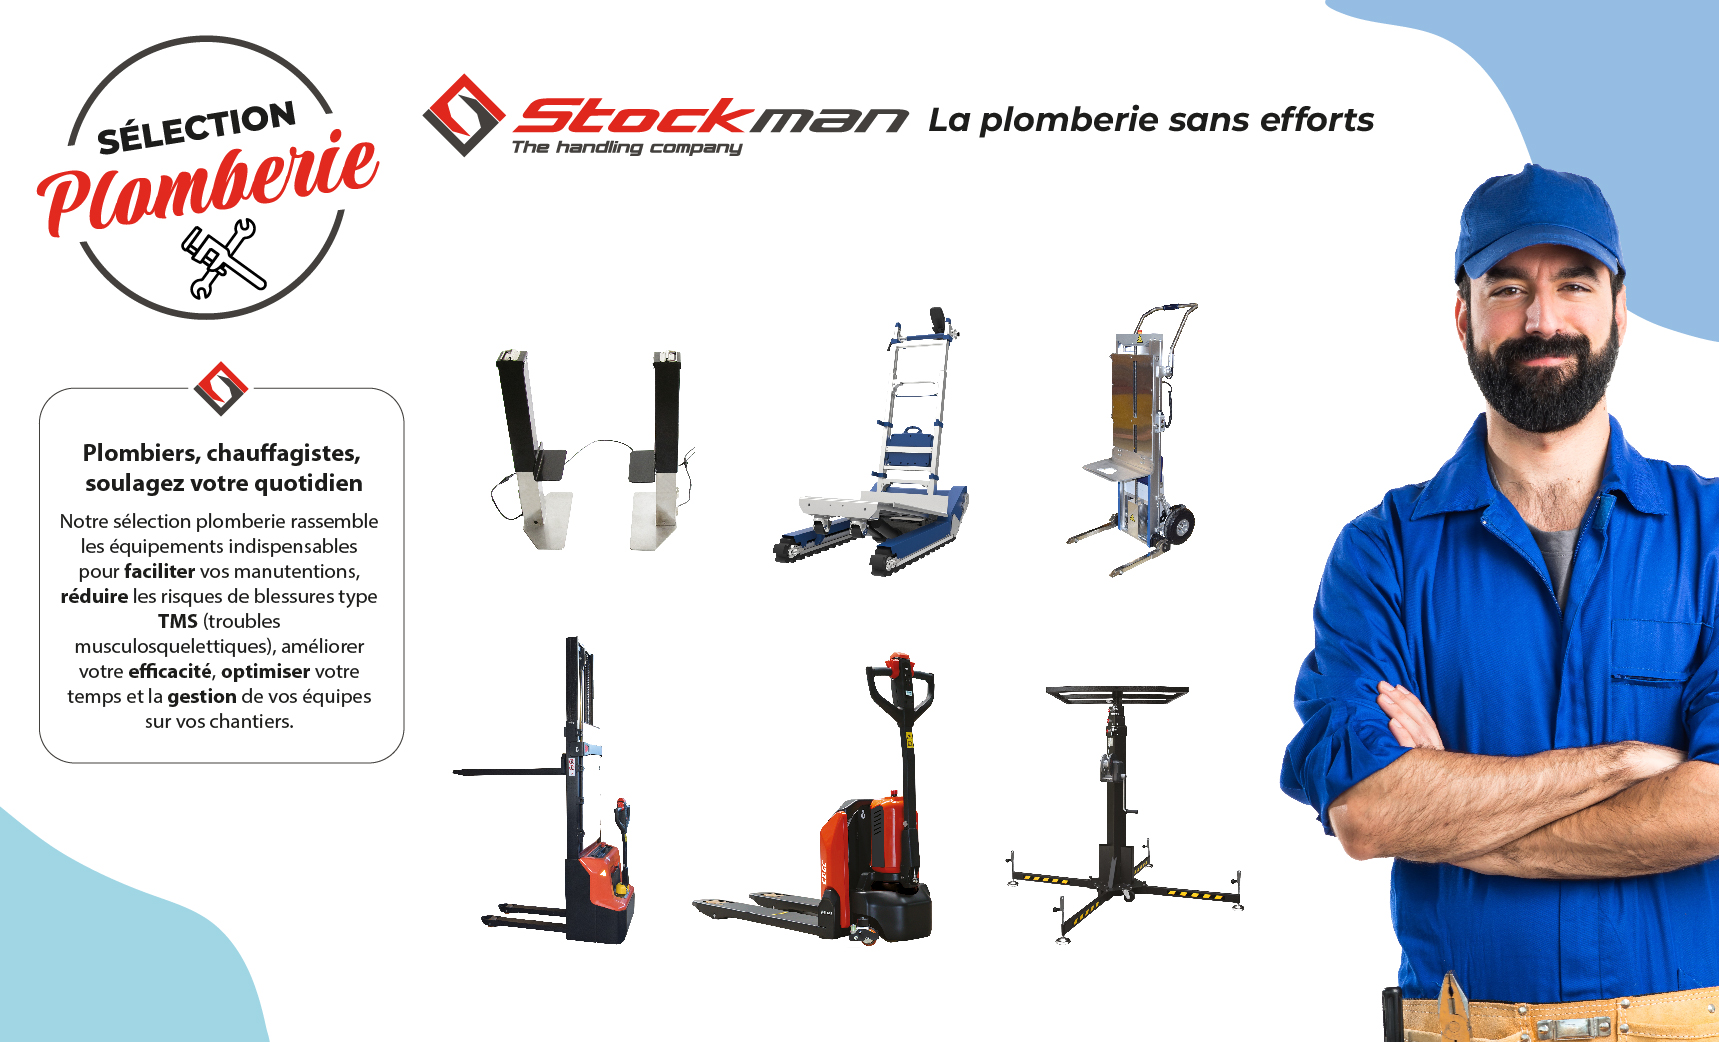 PLUMBERS: revolutionize your daily jobs with STOCKMAN handling and lifting solutions